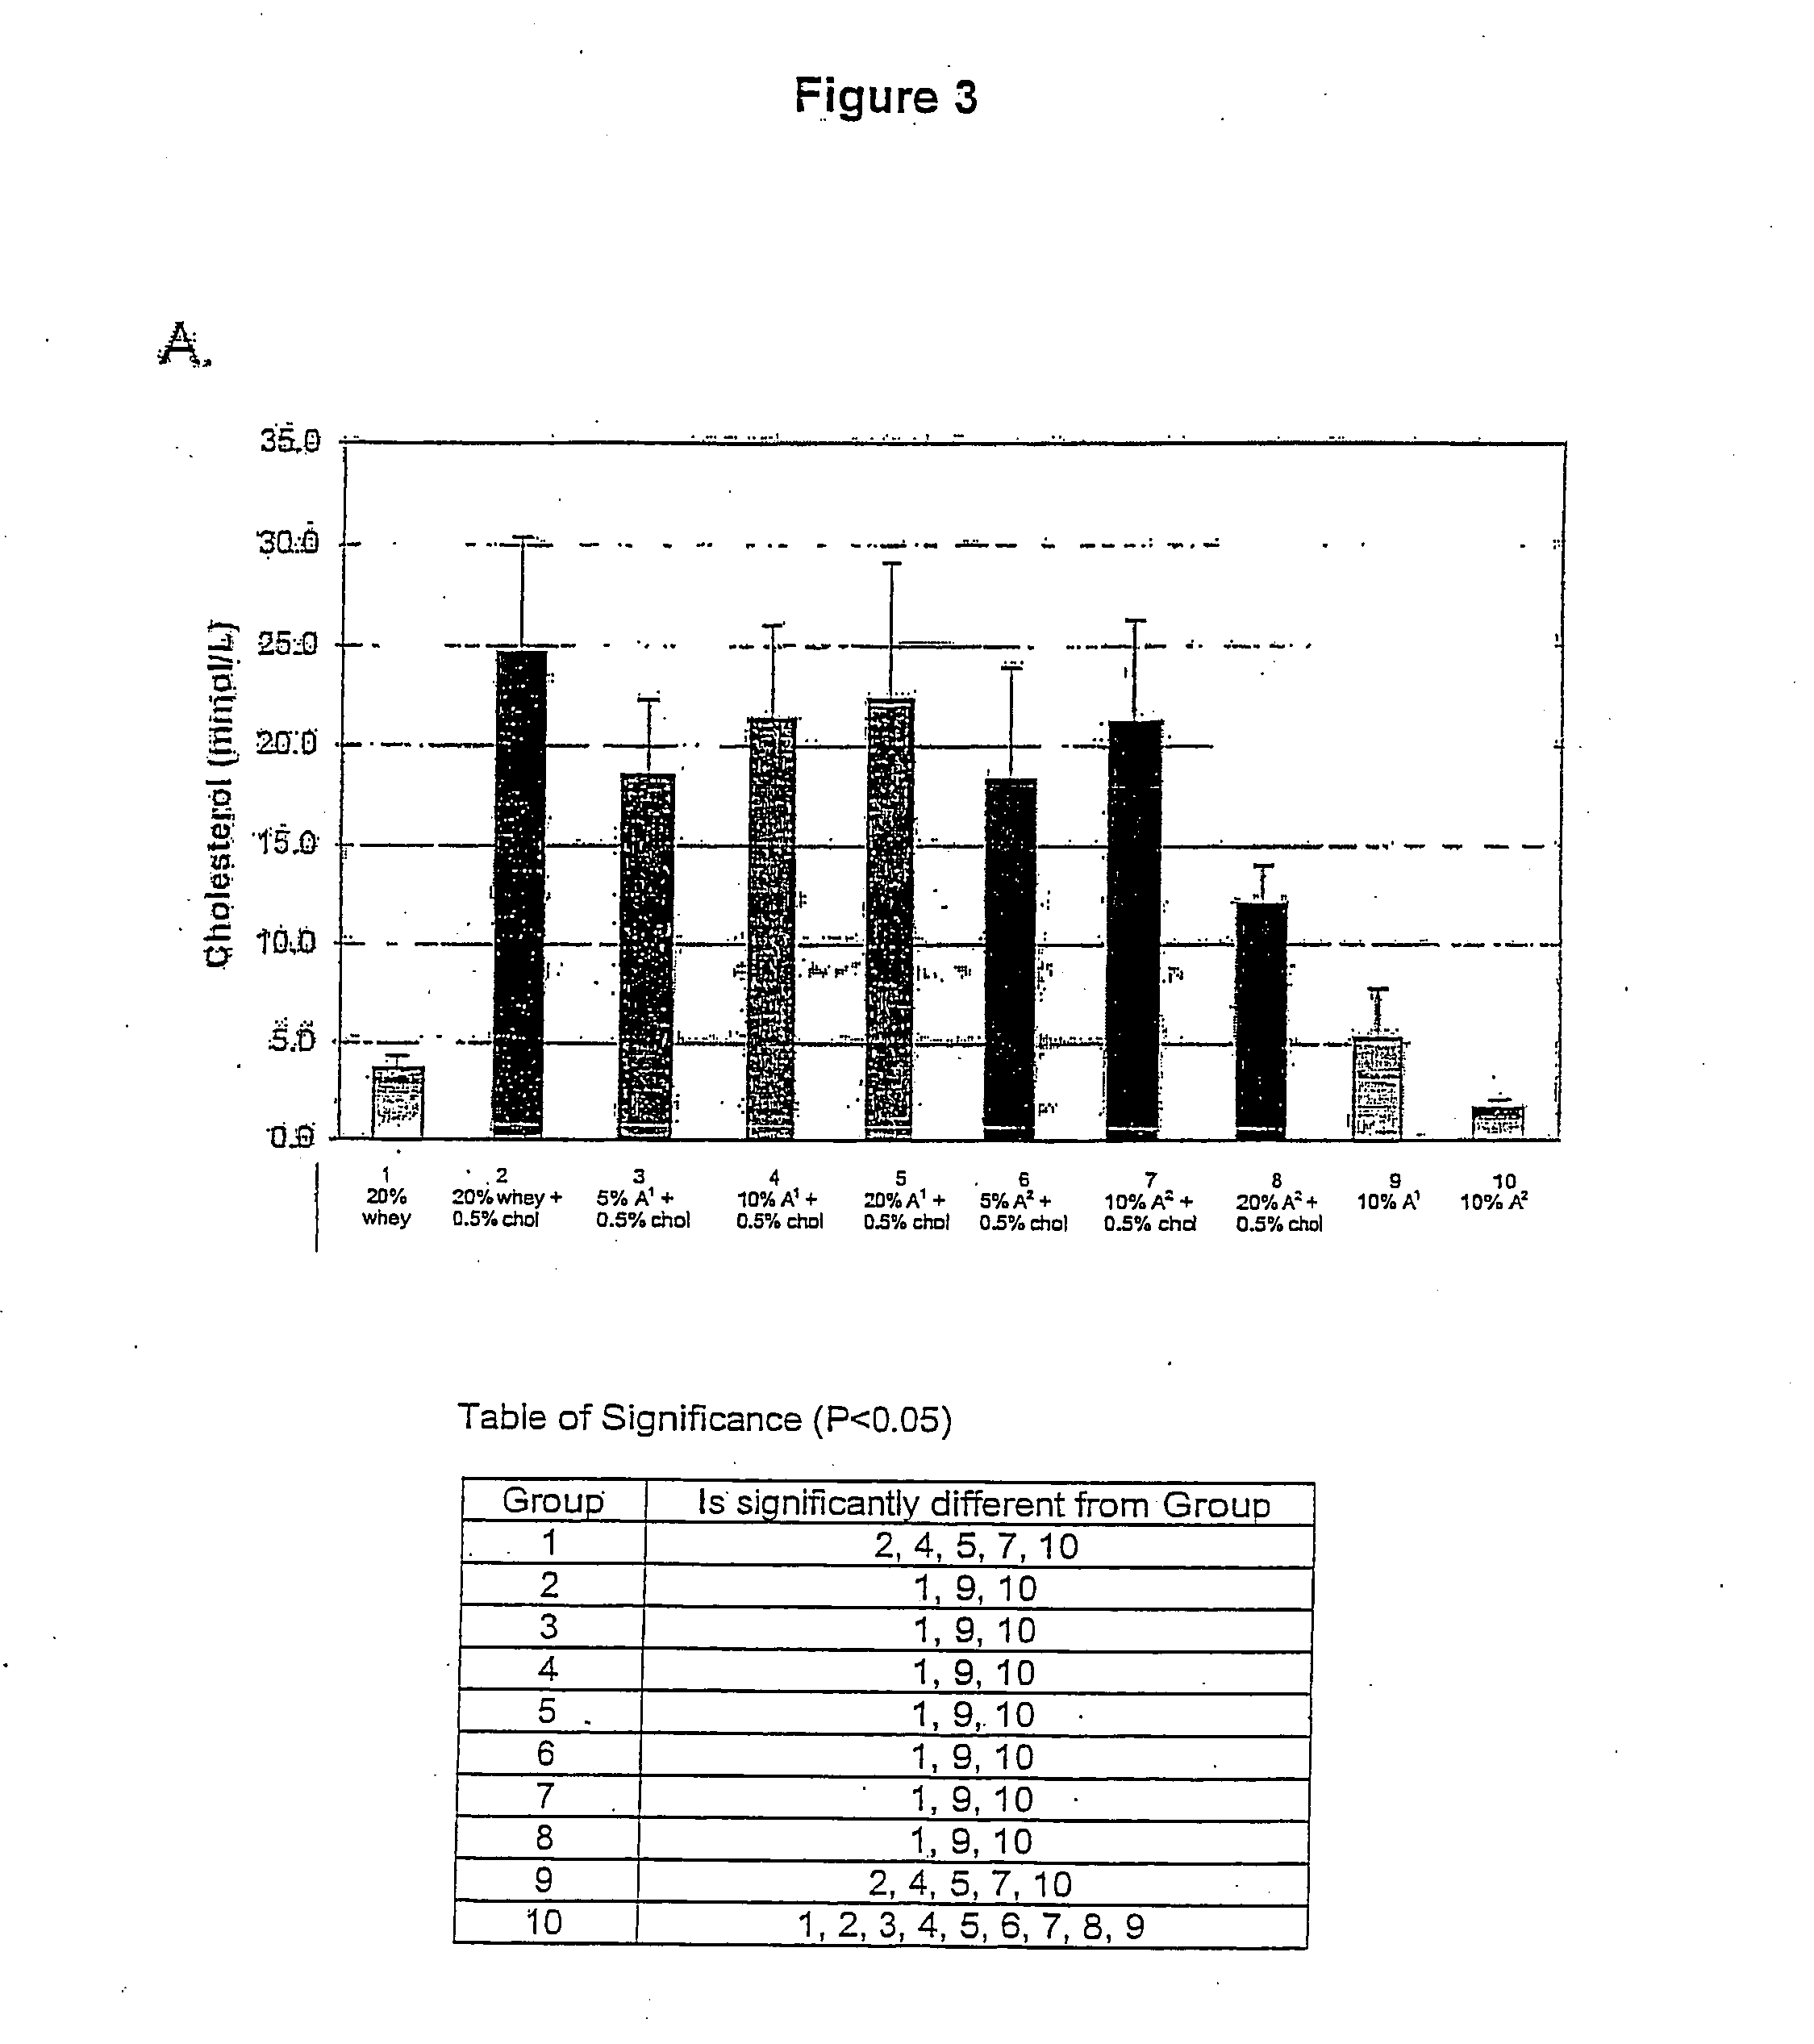 Therapeutic uses of beta-casein a2 and dietary supplement containing beta-casein a2